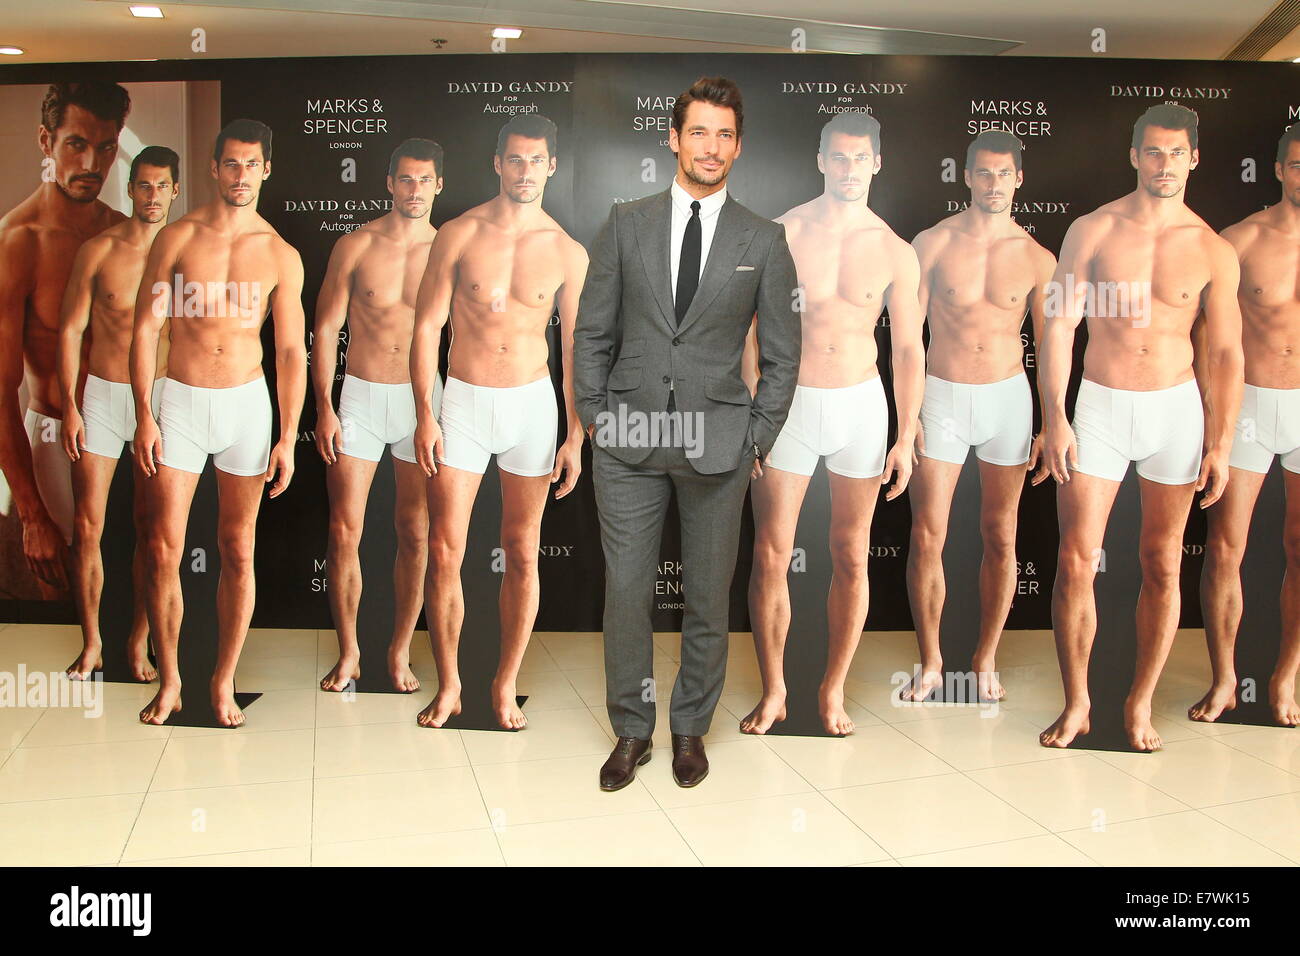 Super model David Gandy attends the fans meeting conference at Marks & Spencer in Hongkong, China on 23th September, 2014. Stock Photo